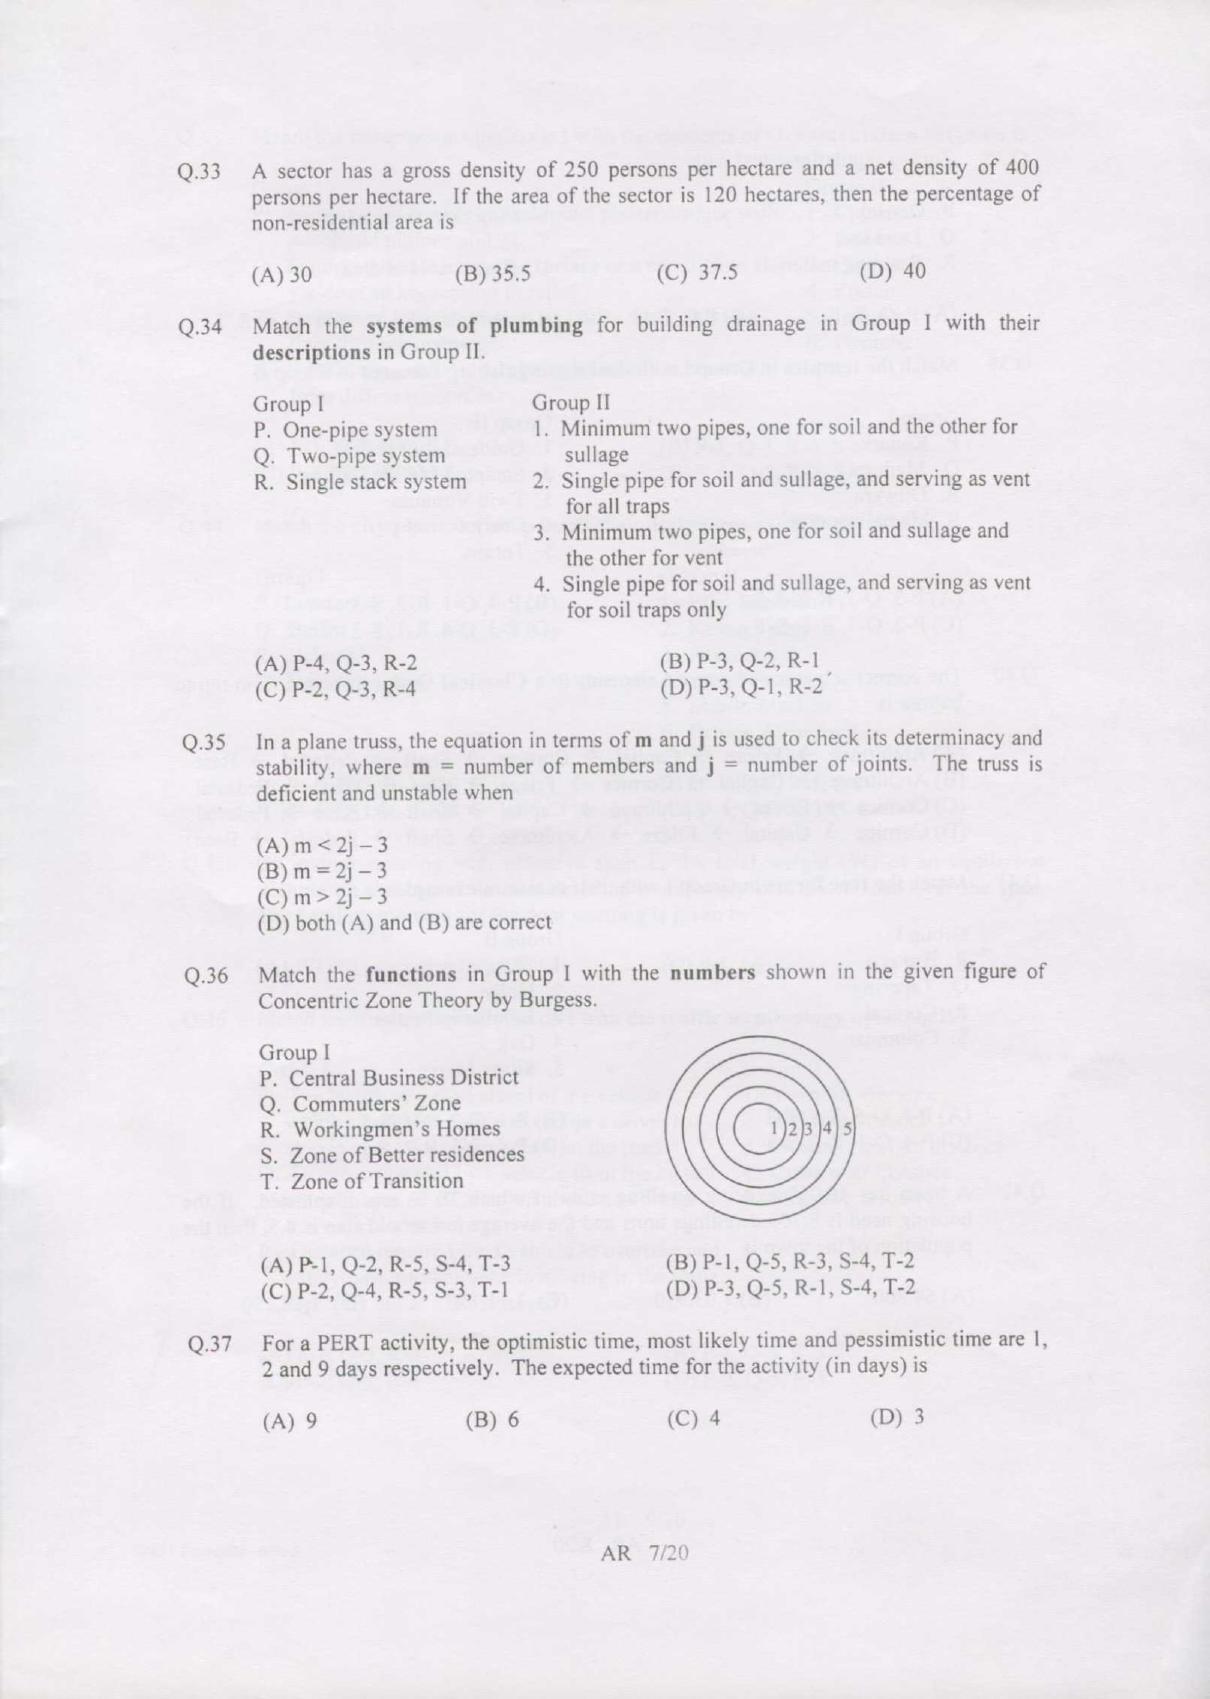 GATE 2007 Architecture and Planning (AR) Question Paper with Answer Key - Page 7